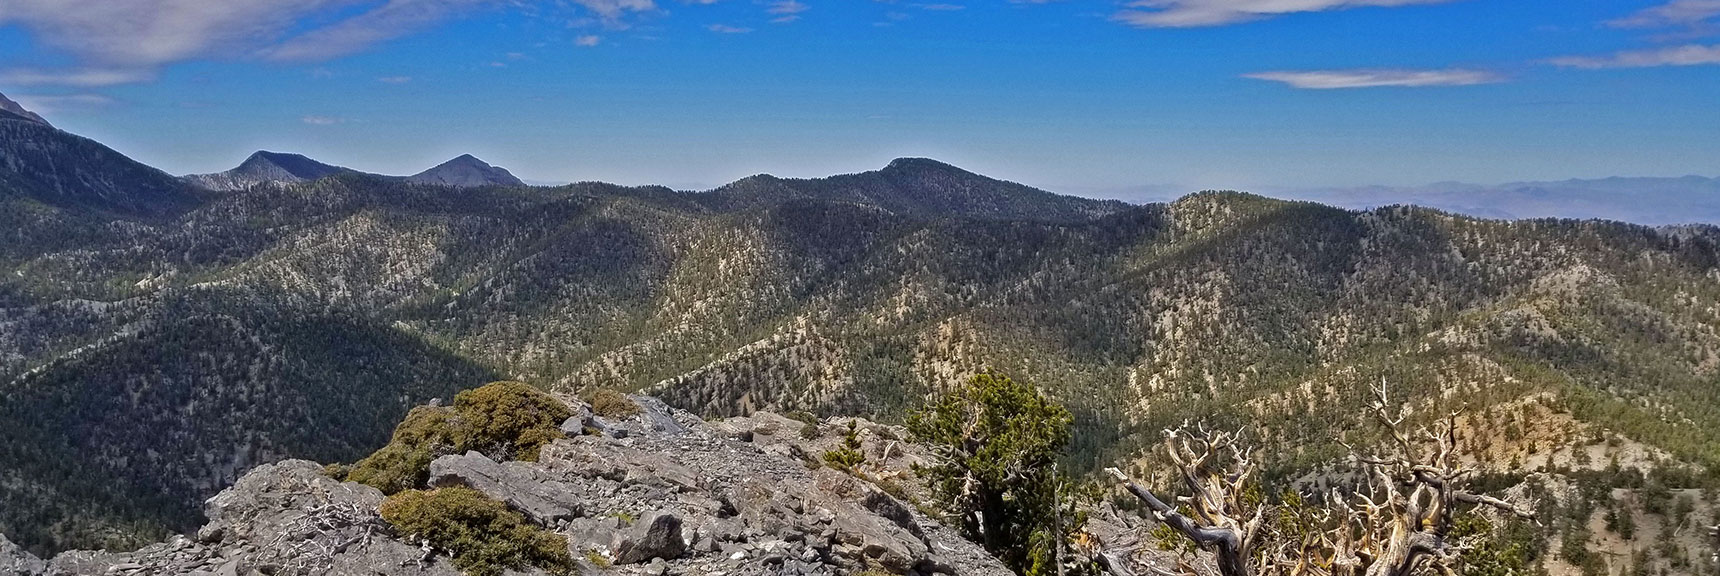 Upper End of Lee Canyon with Bonanza Trail Ridgeline Heading Toward the Right (West). | The Sisters South | Lee Canyon | Mt Charleston Wilderness | Spring Mountains, Nevada